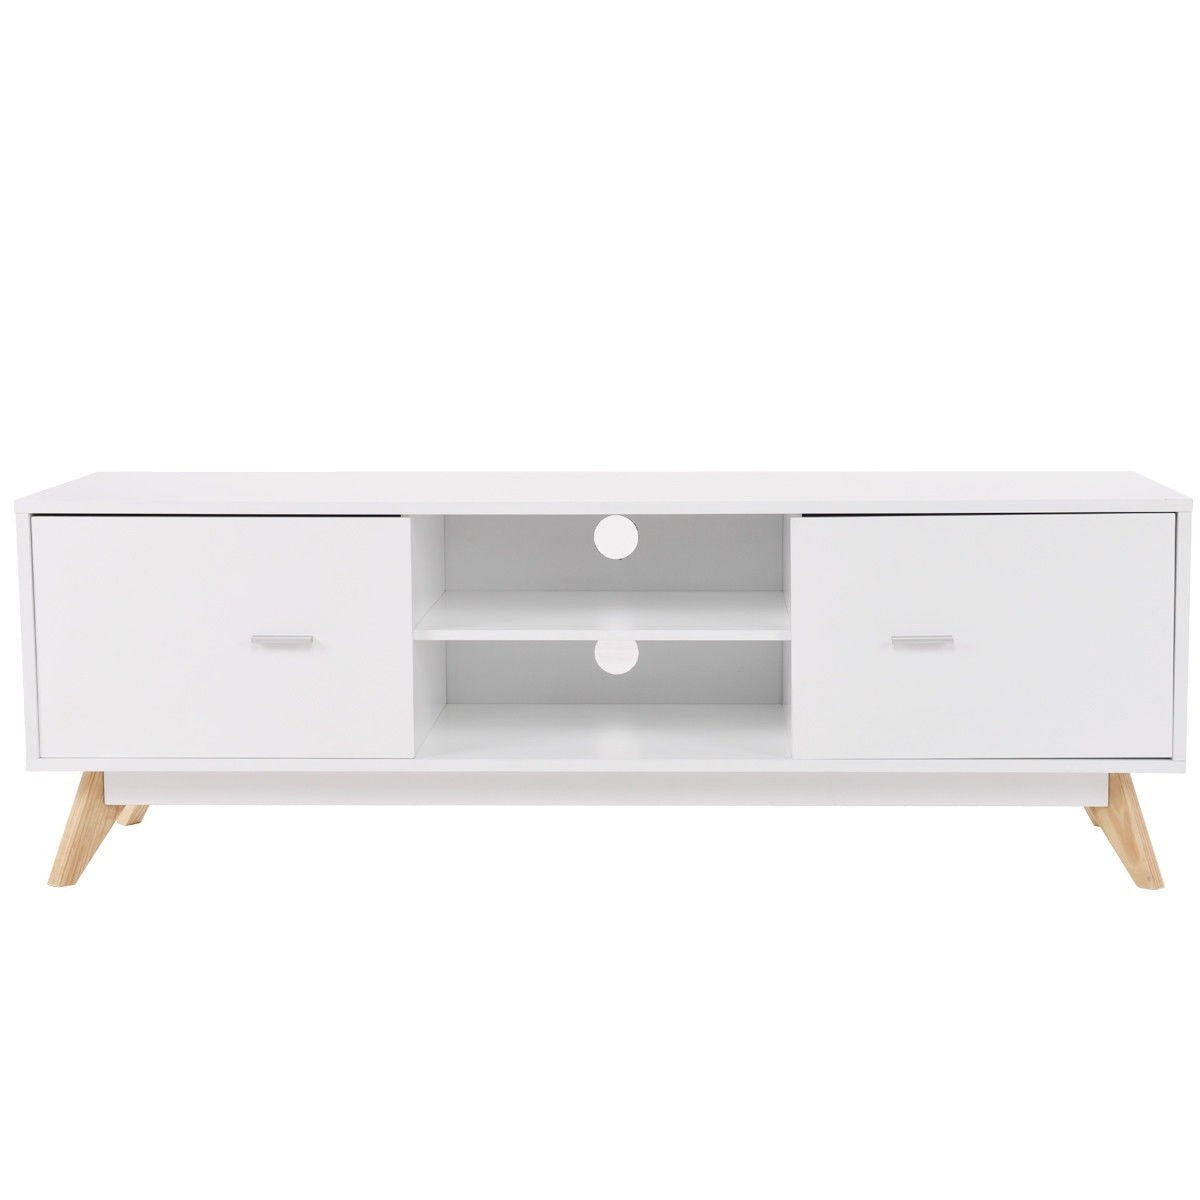 Living Room > TV Stands And Entertainment Centers - Modern Mid Century Style White TV Stand With Wood Legs